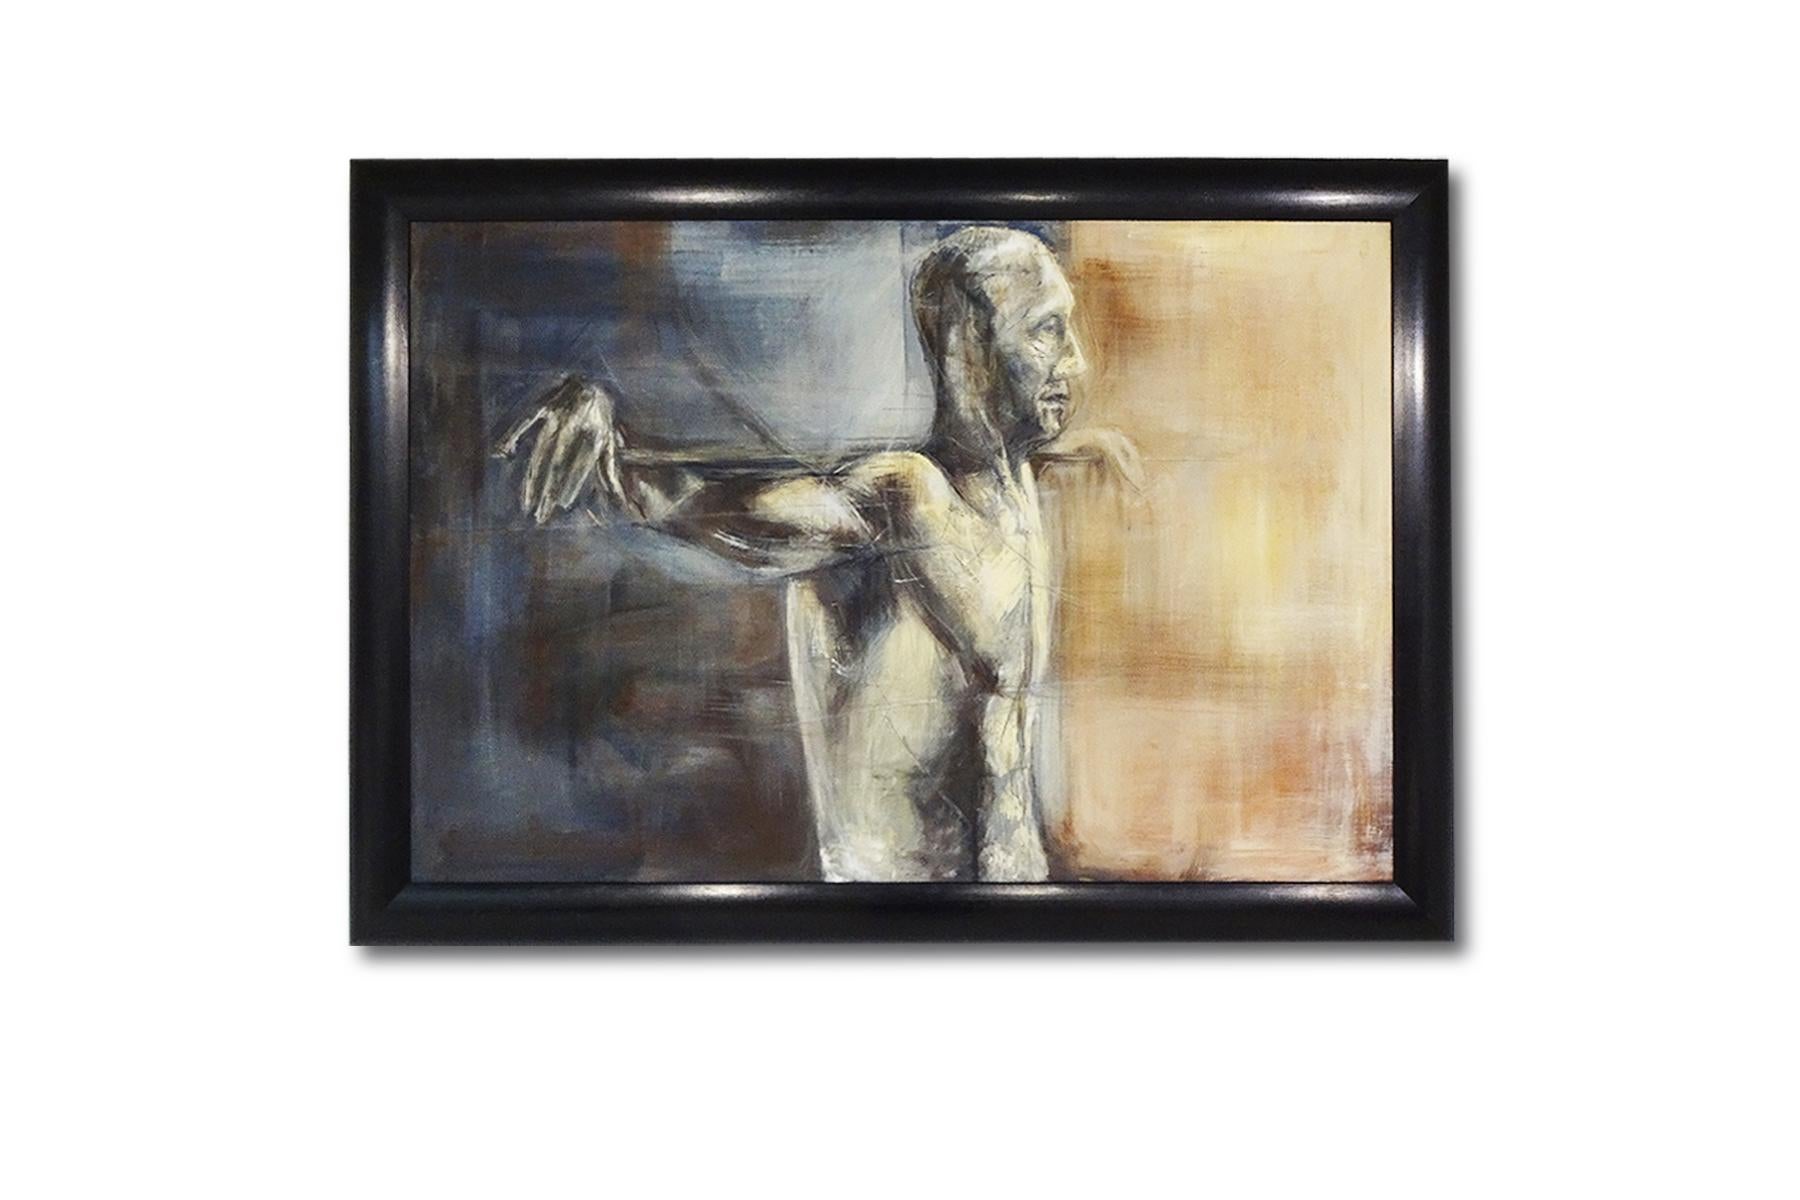 Large original oil painting by unknown artist titled ‘The Worker’ in hues of blue, grey, yellow and coral.

This large and impressive modernist figurative art piece has a surrealist feel that is suggested by the figure and setting. By an unknown